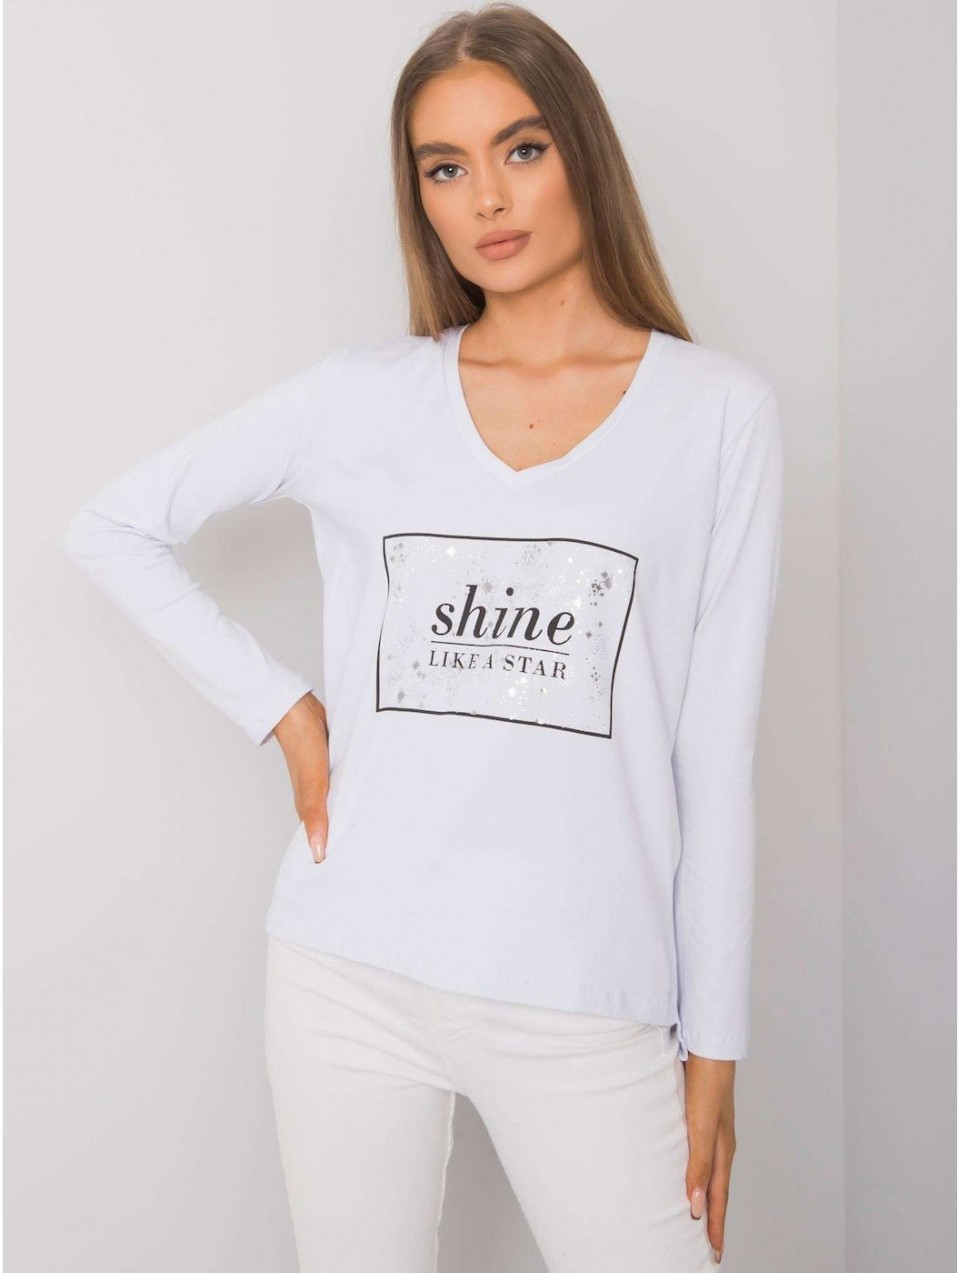 White women's long sleeve shirt with a print